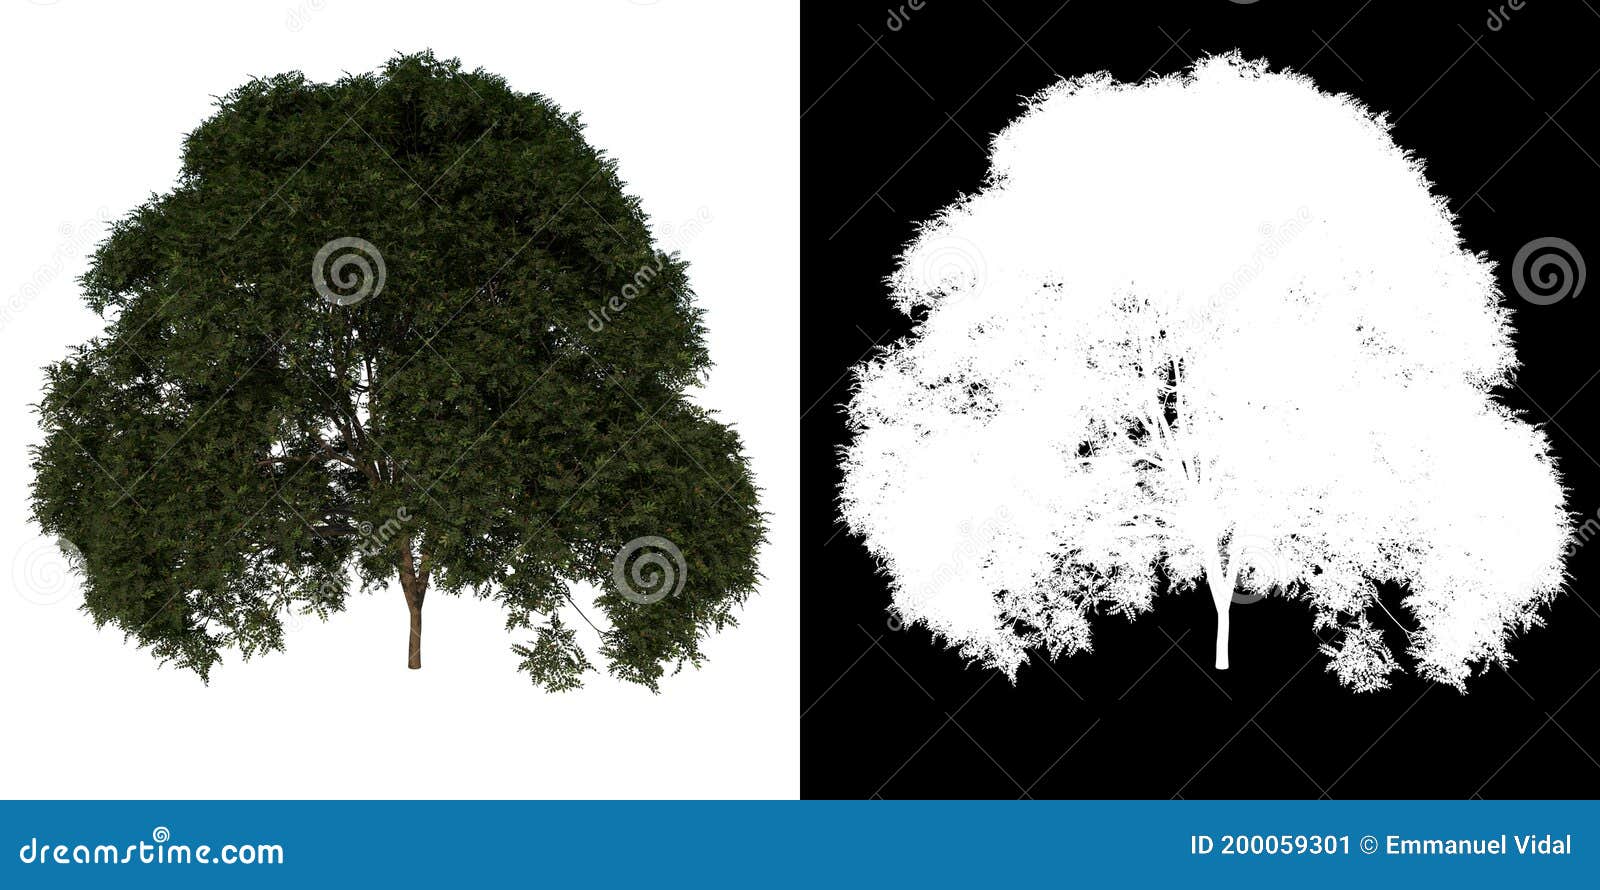 front view tree adolescent mahogany caoba 3 white background alpha png 3d rendering ilustracion 3d